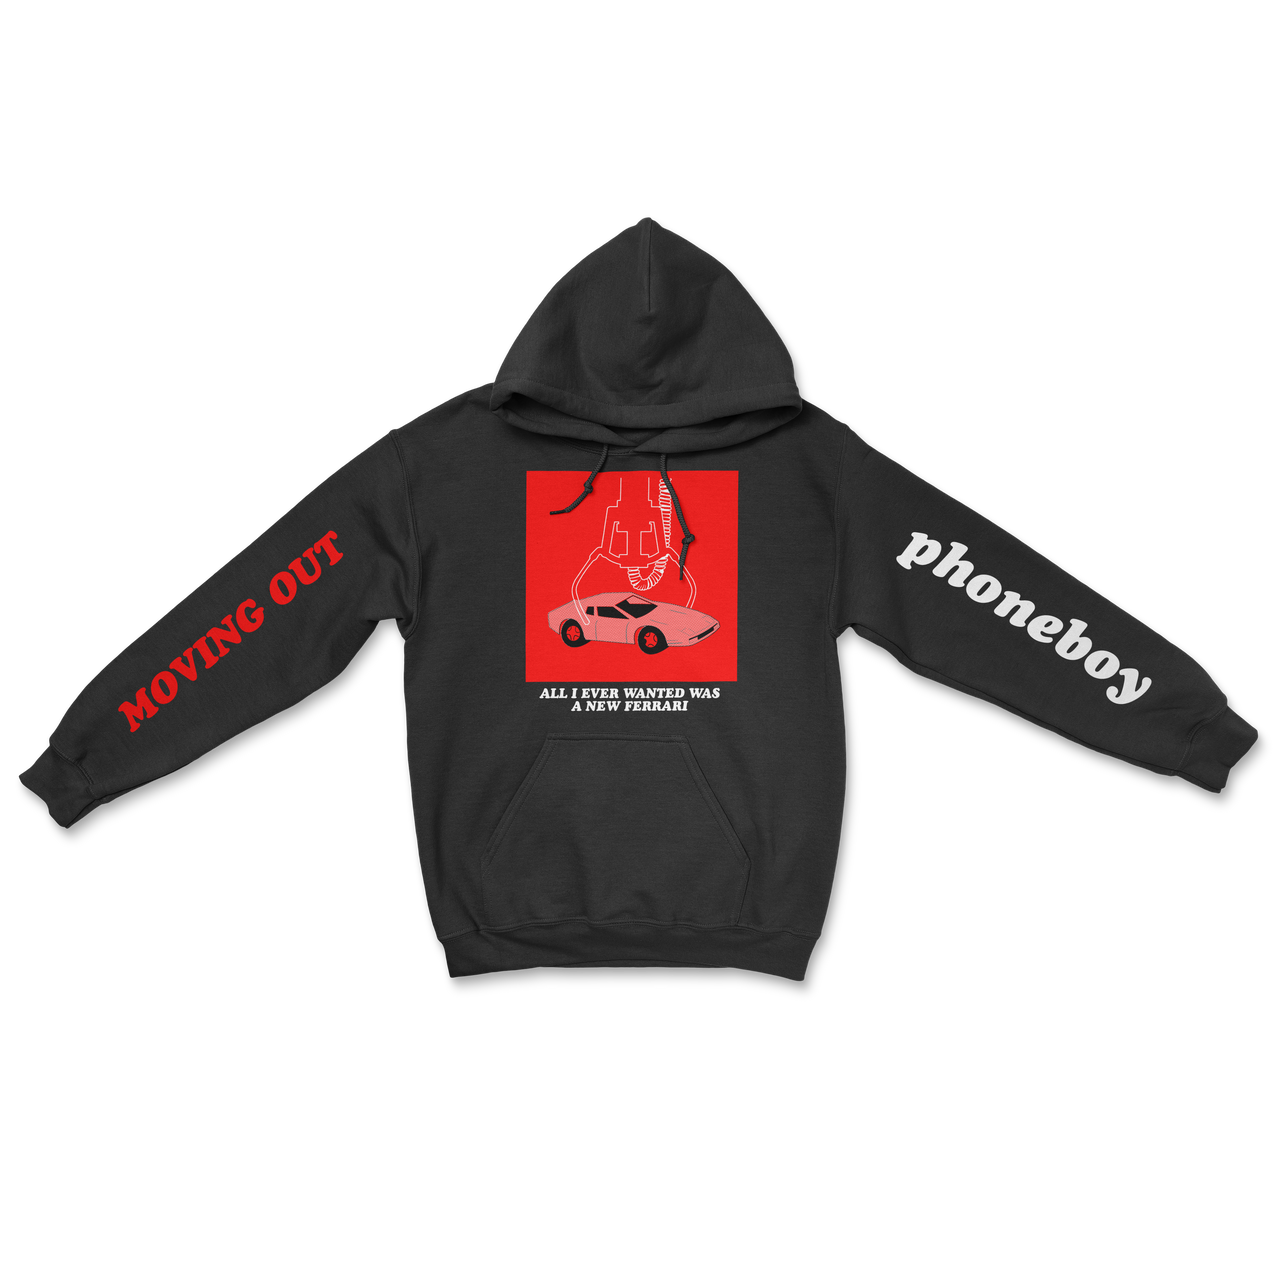 phoneboy moving out hoodie